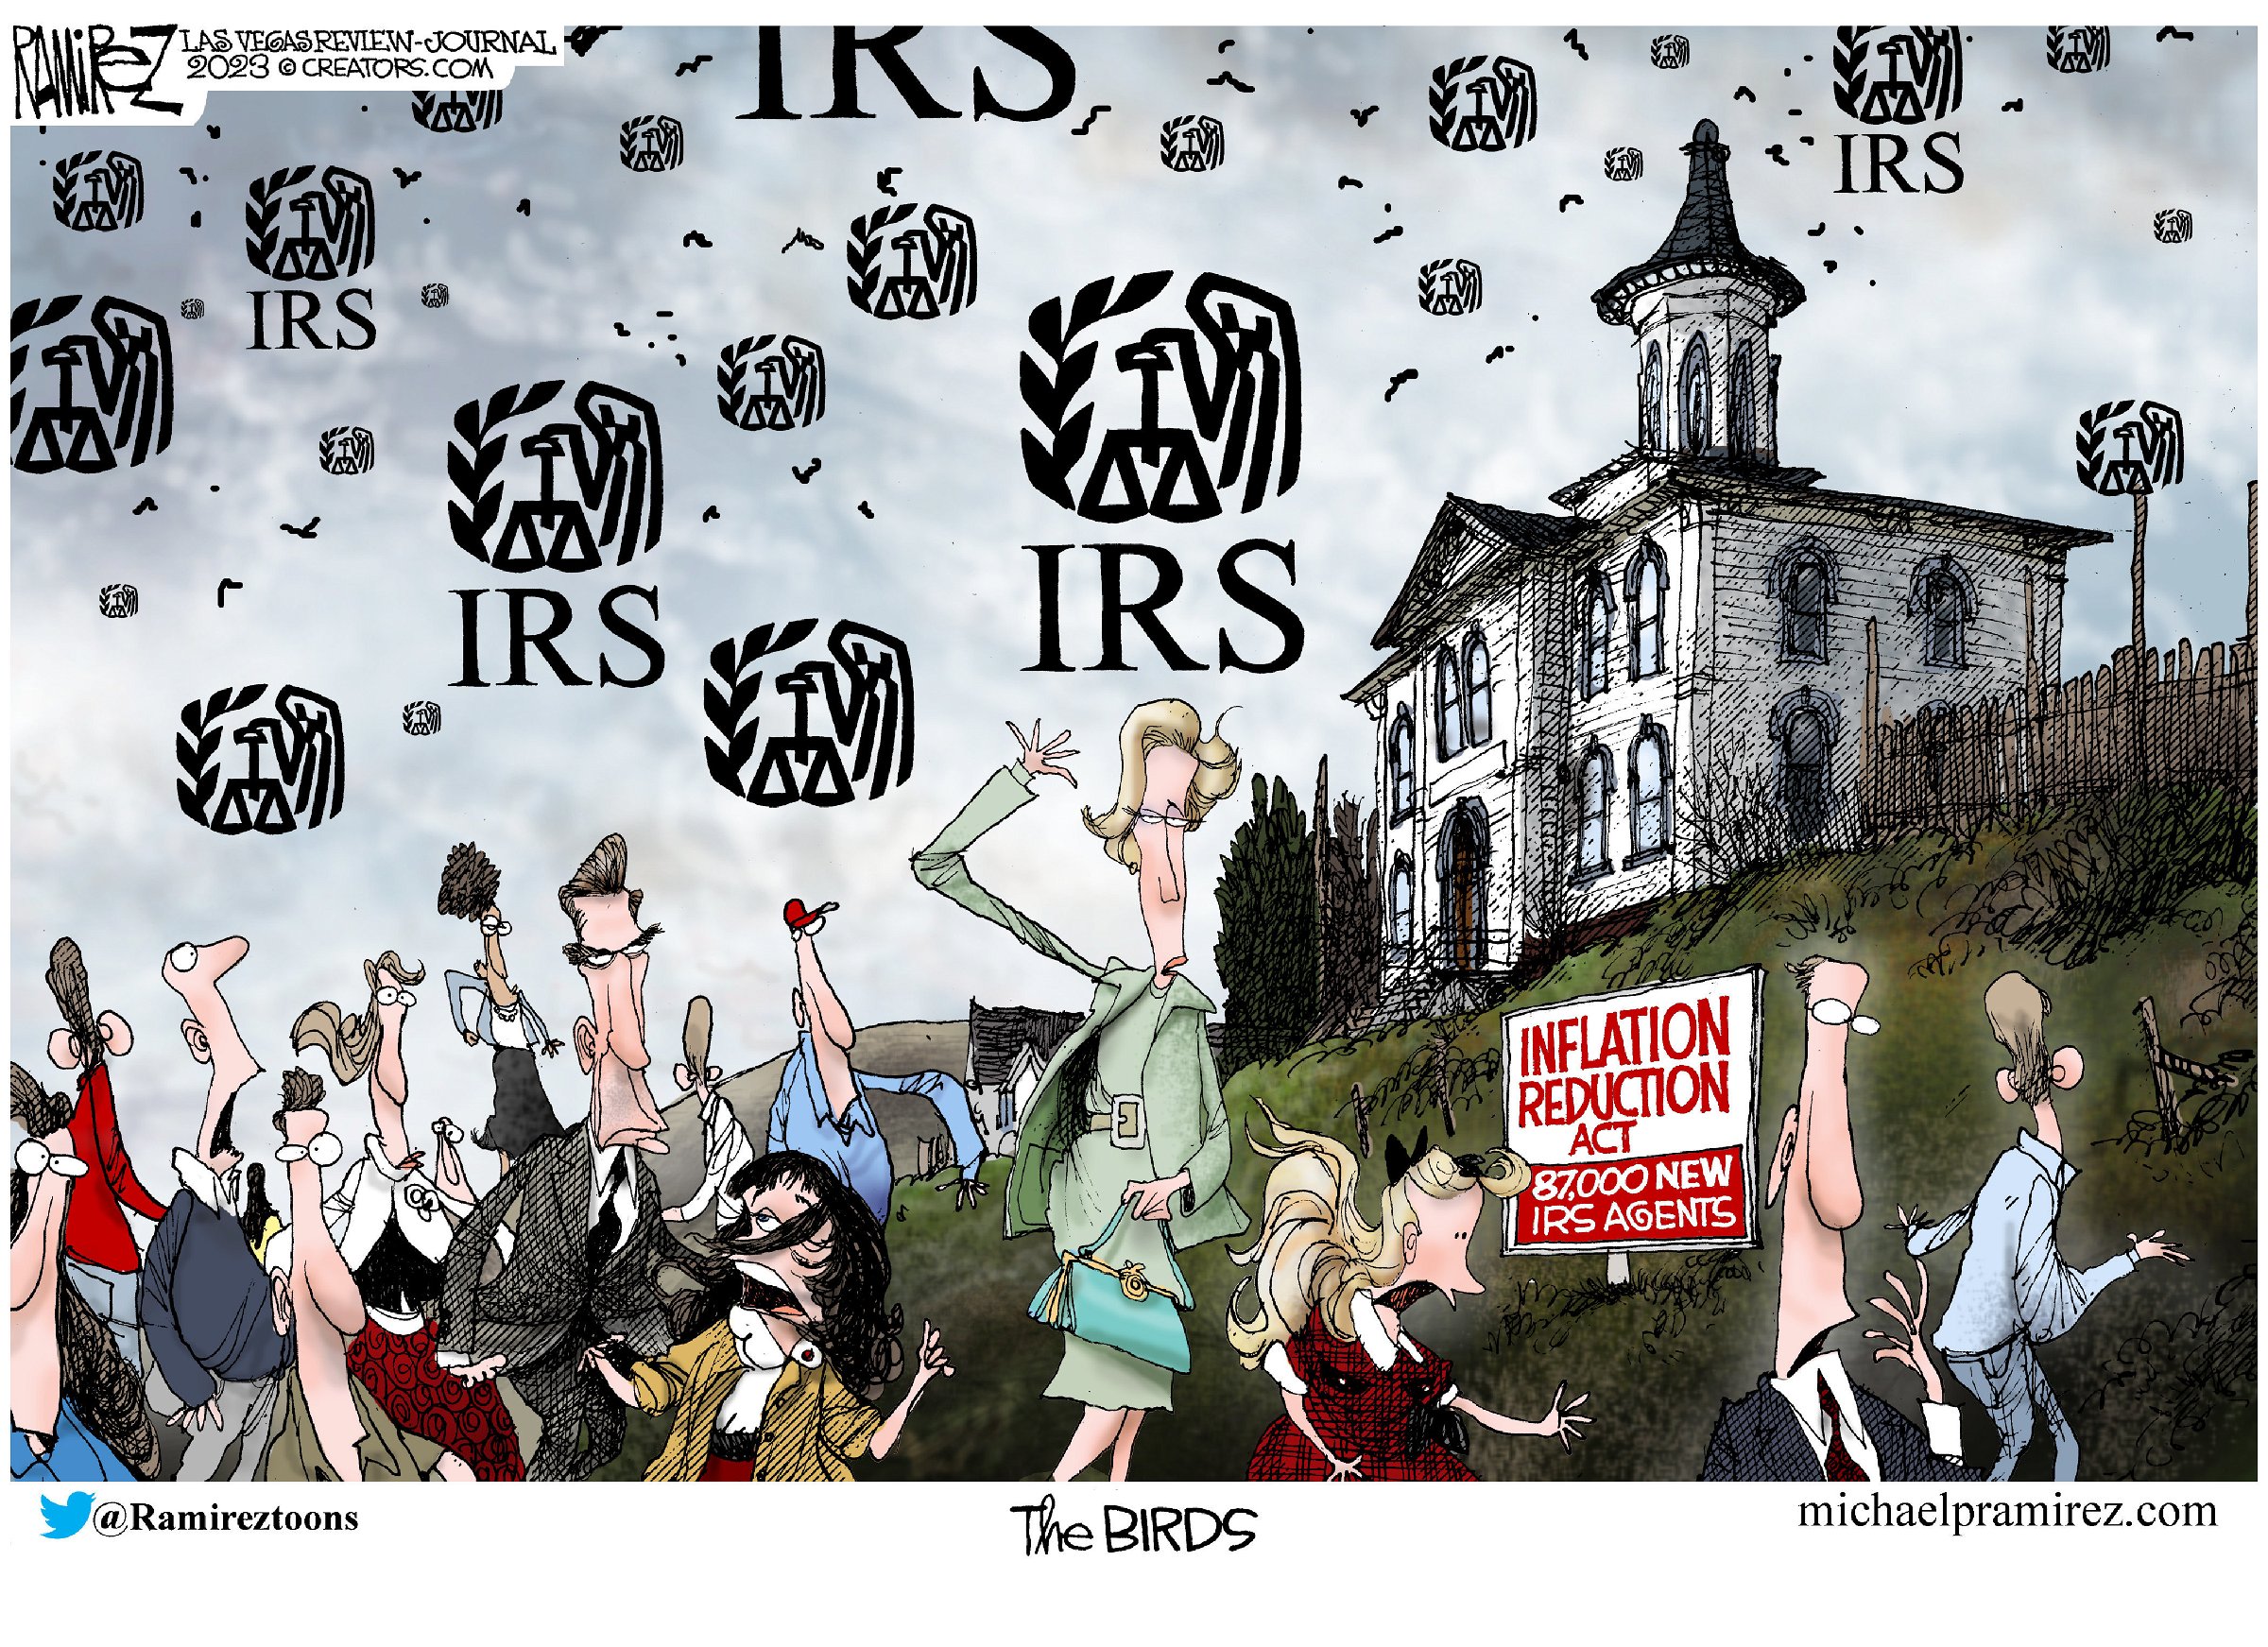 the IRS tax day birds